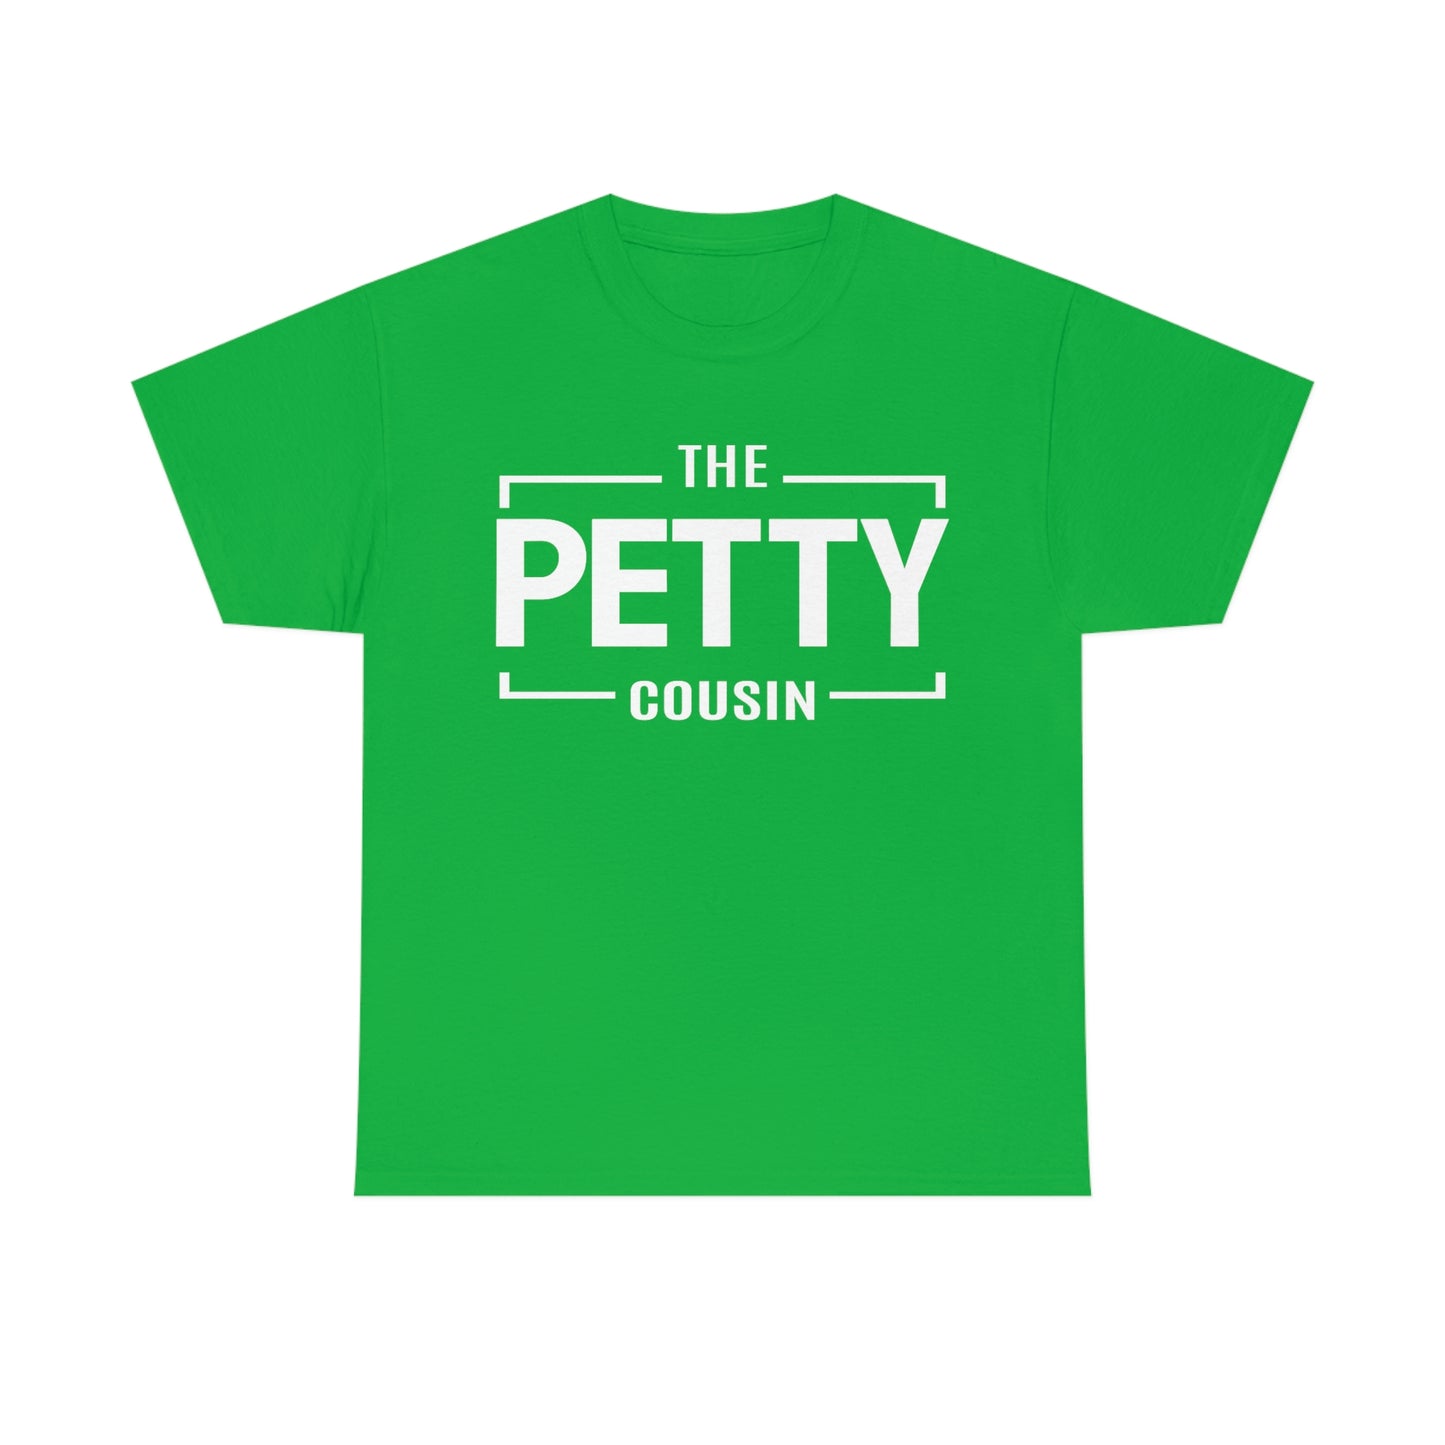 Cousin Group T-shirts